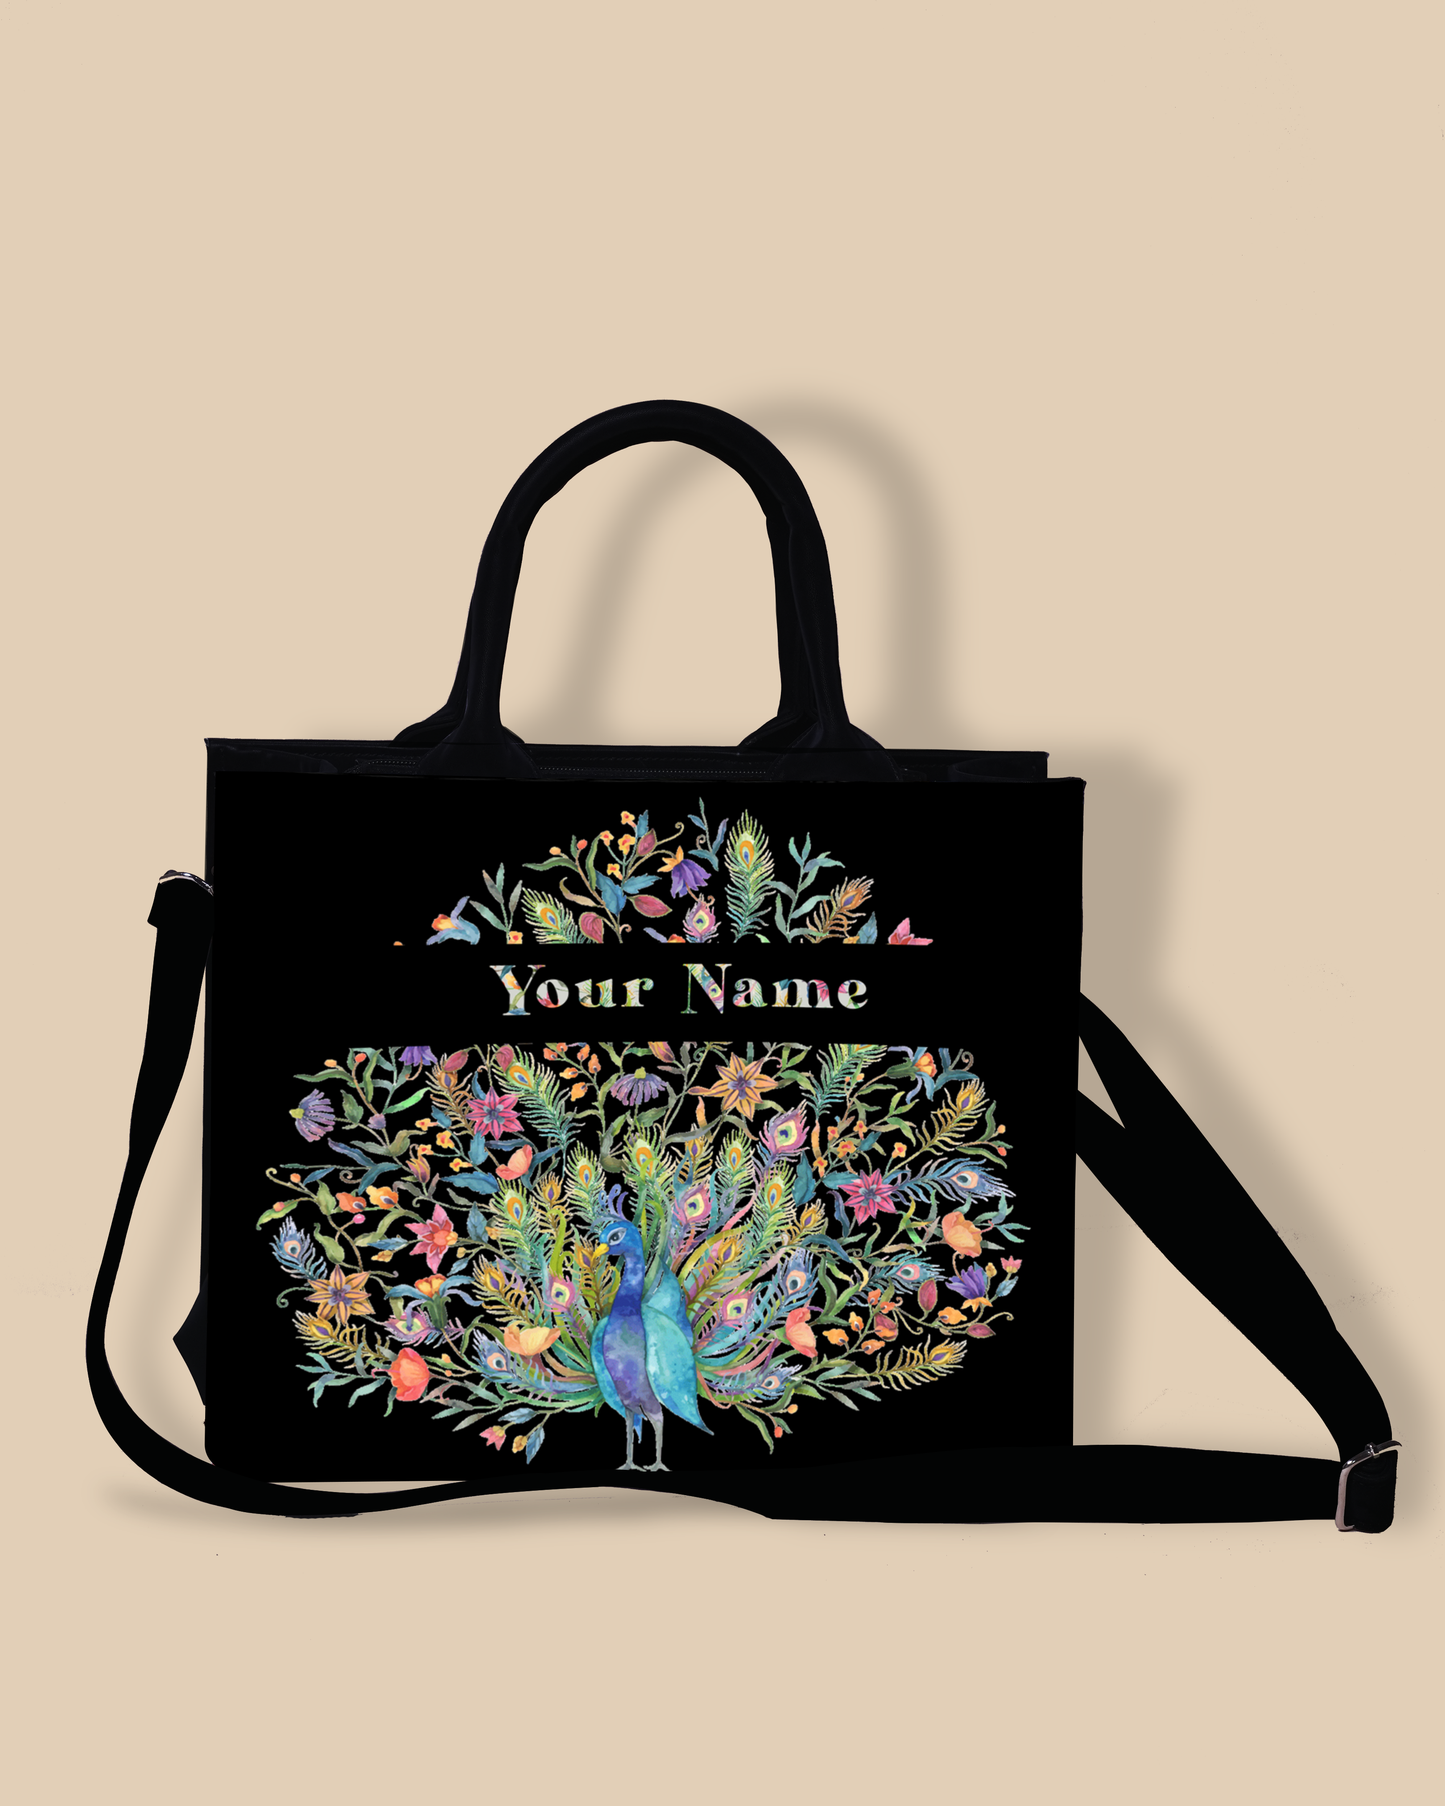 Up Embossed Peacock Design on Leather Personalized Small Tote Bag